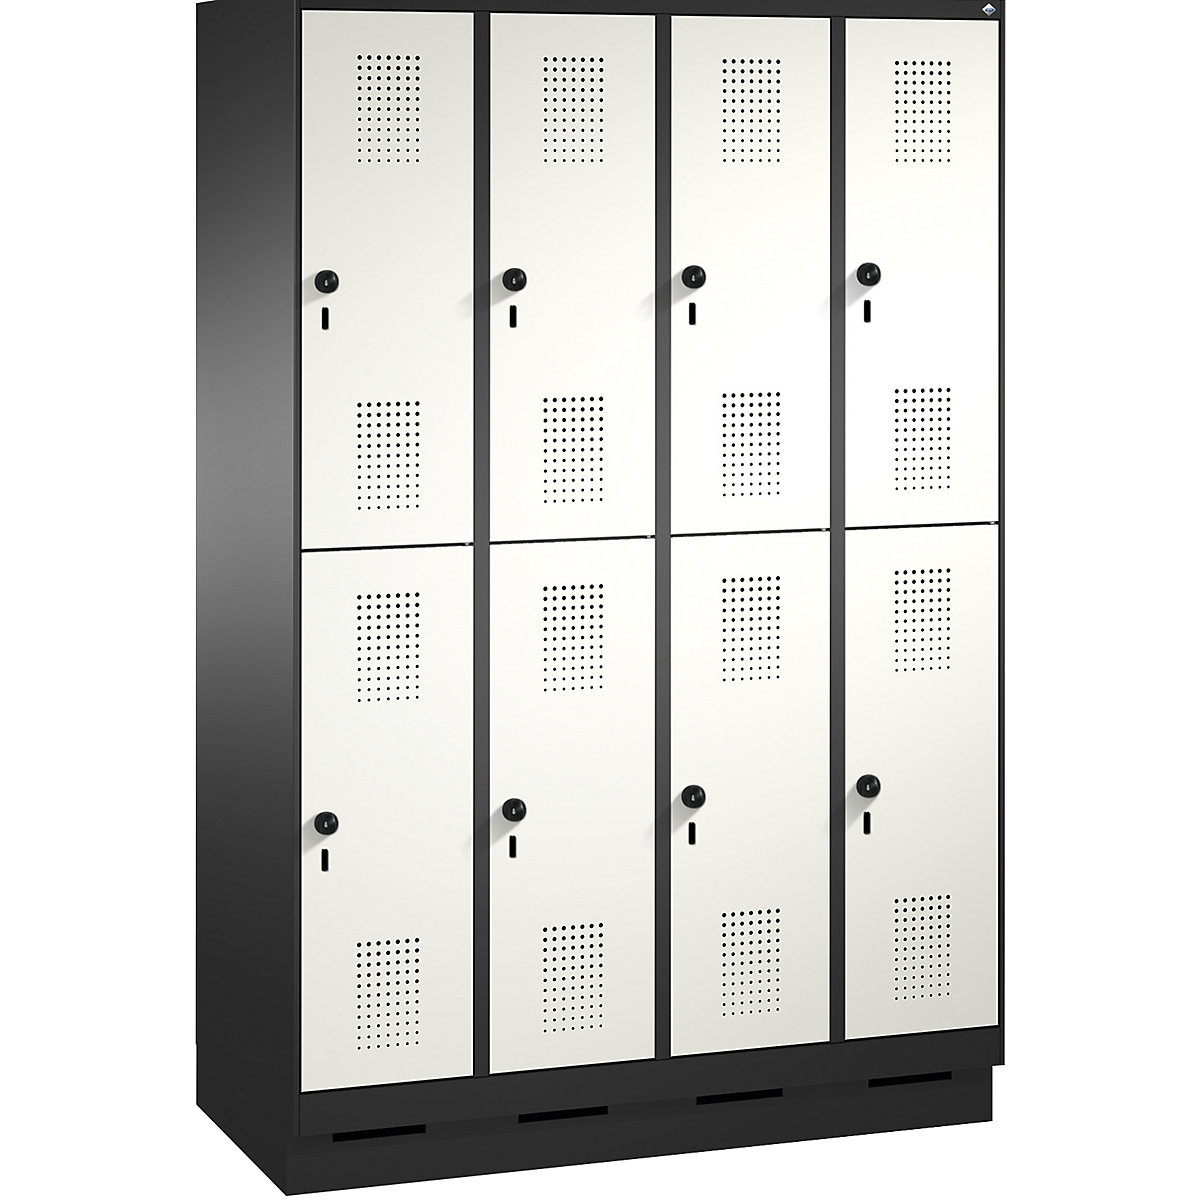 EVOLO cloakroom locker, double tier, with plinth – C+P, 4 compartments, 2 shelf compartments each, compartment width 300 mm, black grey / traffic white-15